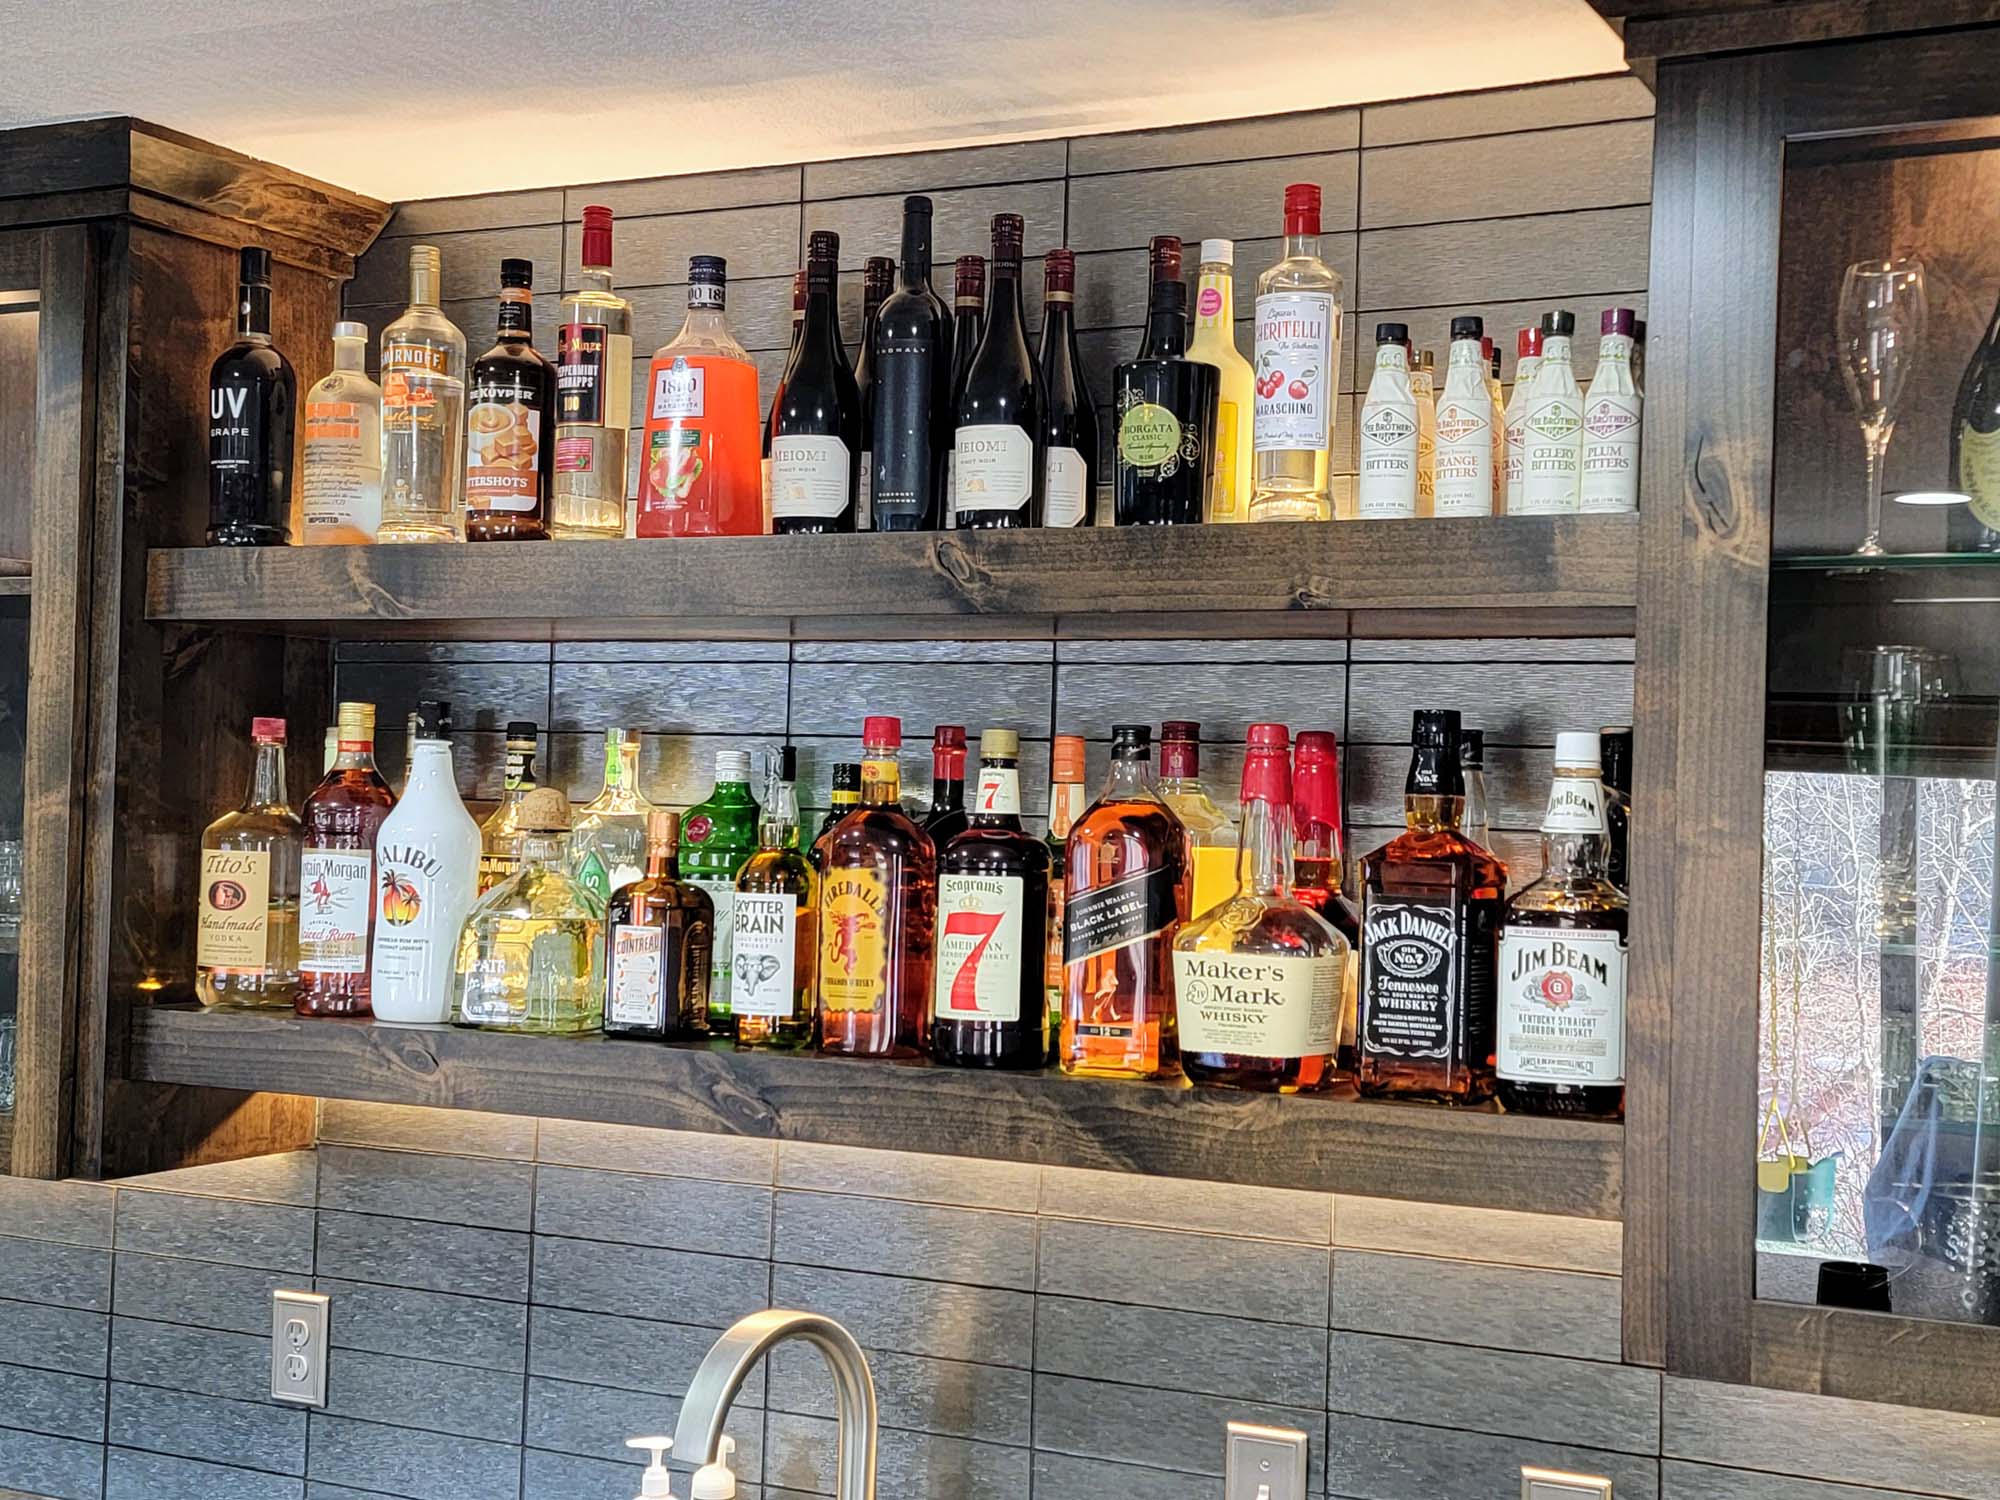 Beautifully display your entire liquor stock